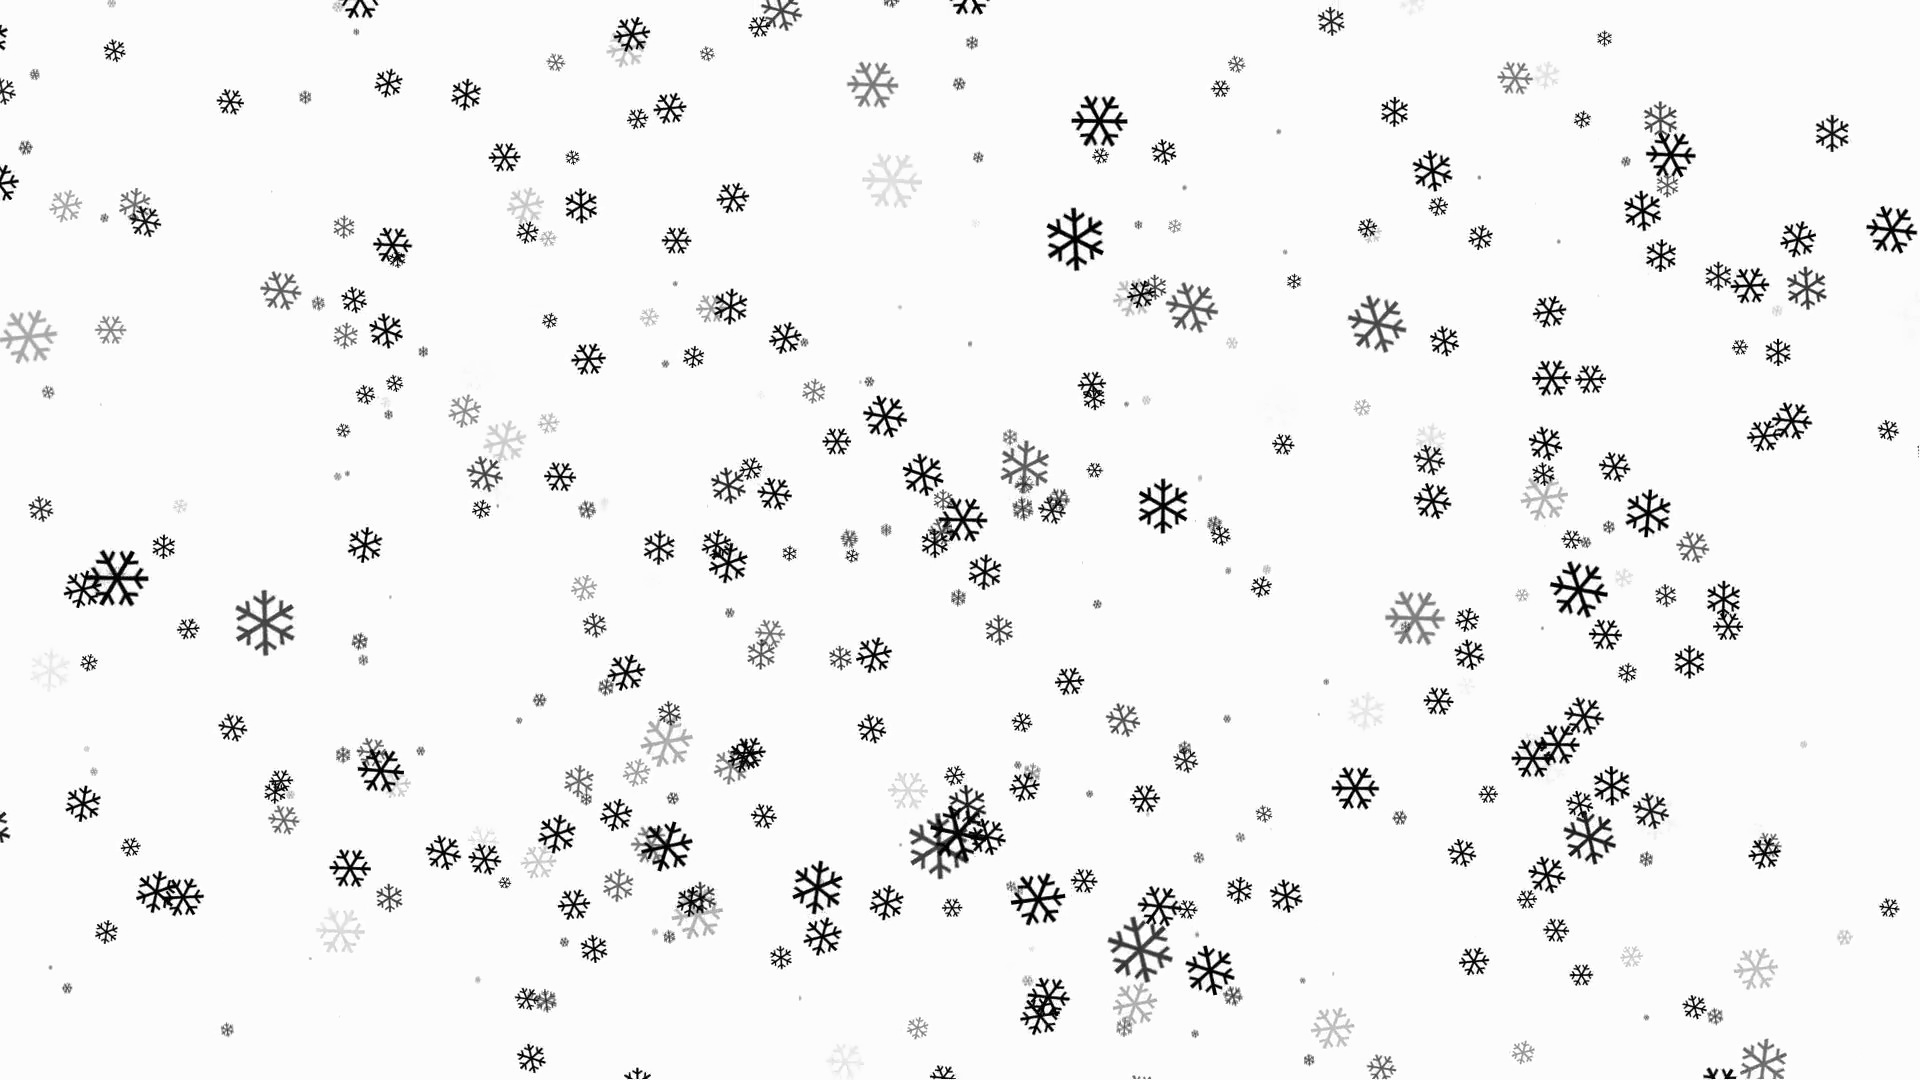 Snowflake PNG Image File - PNG All | PNG All